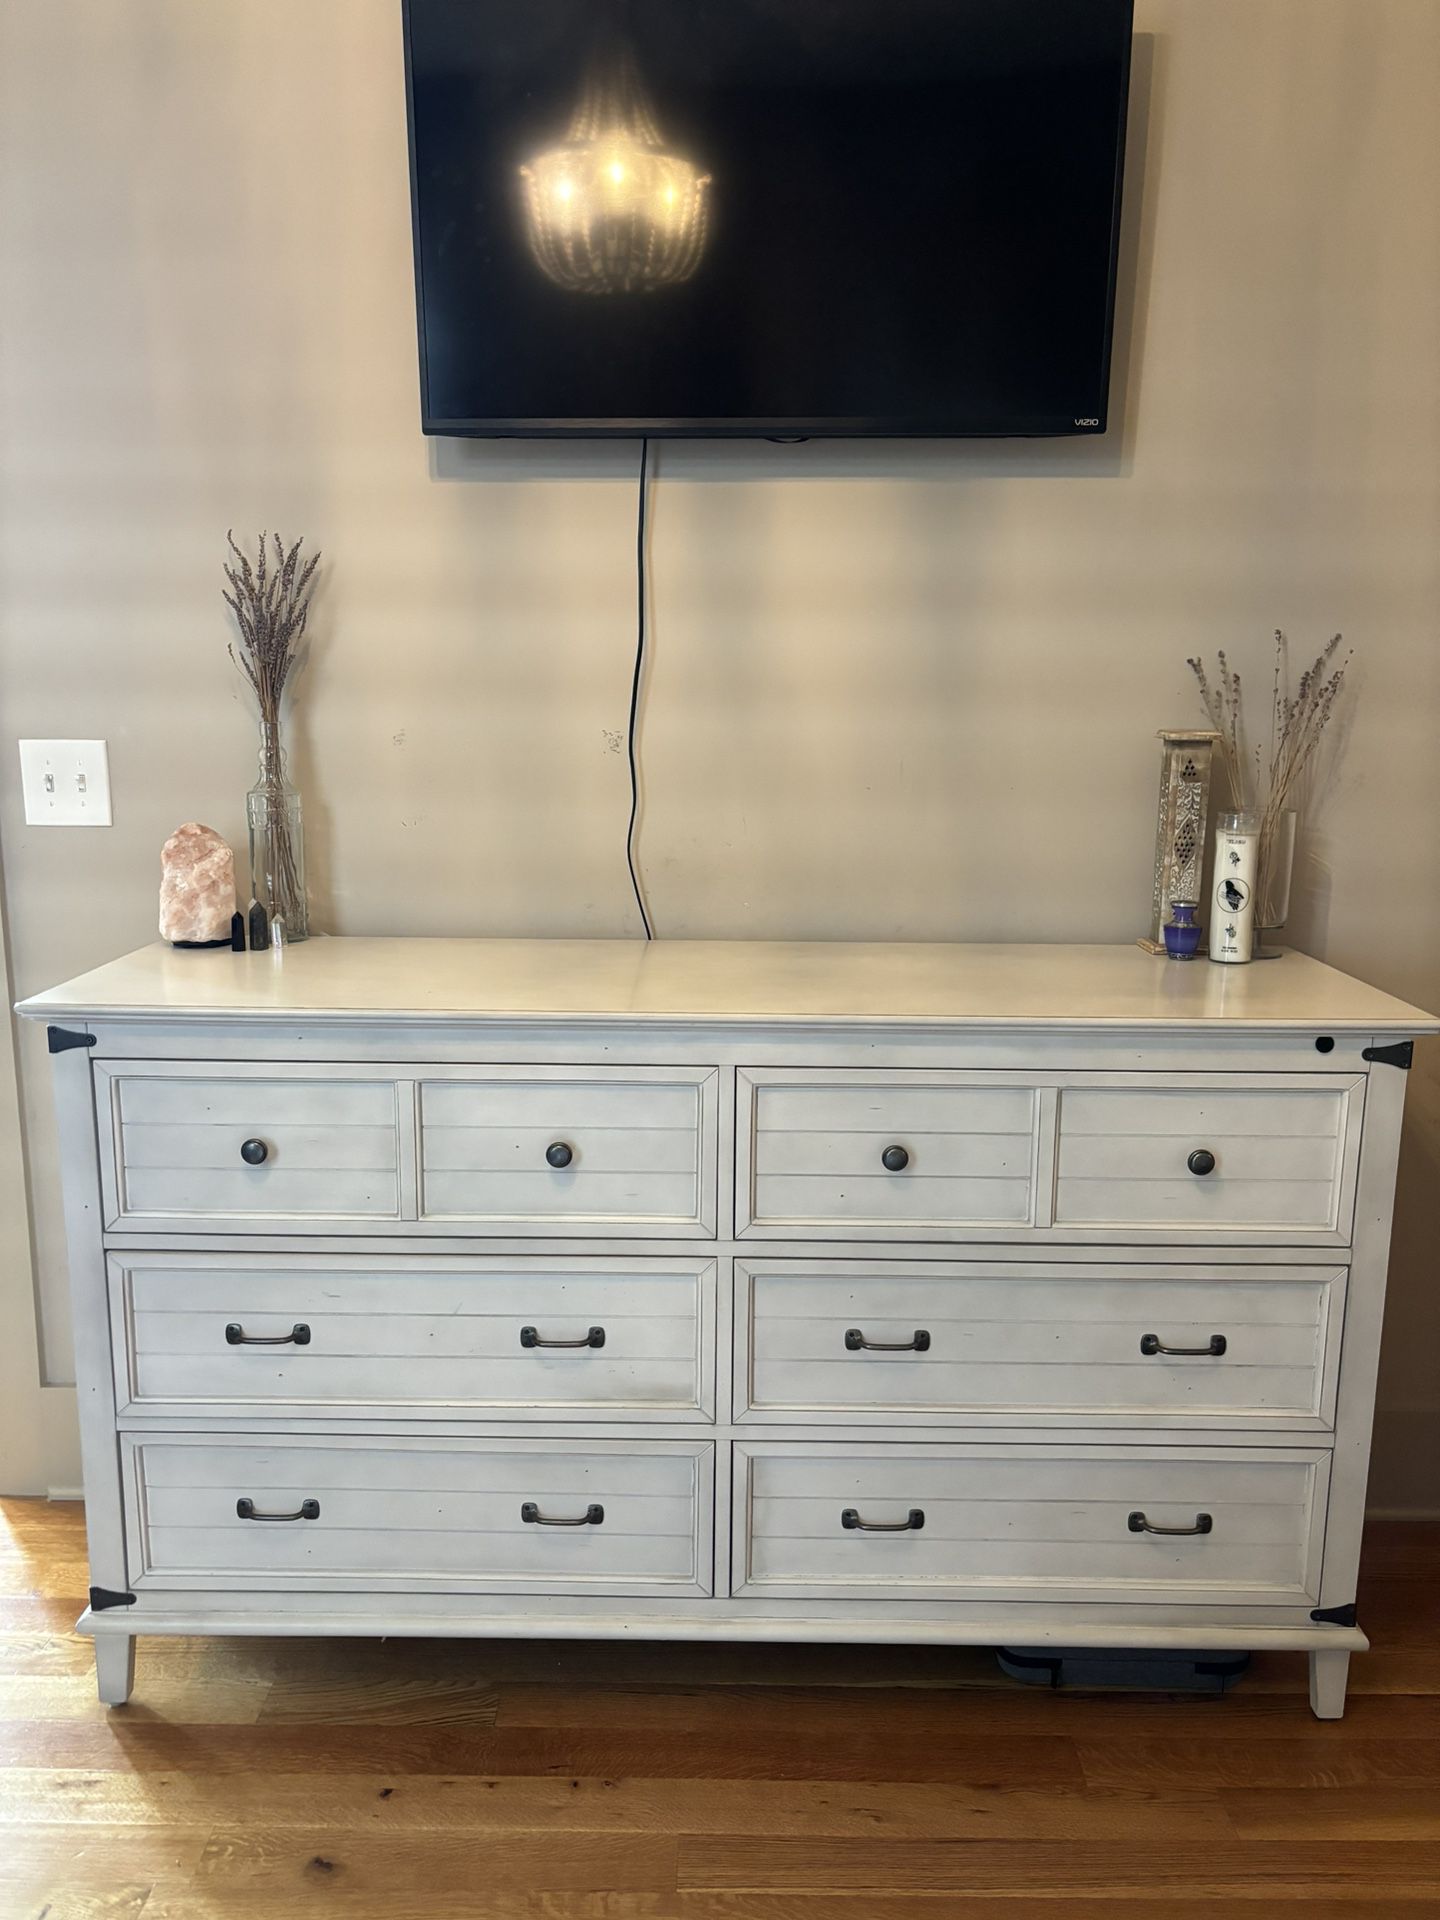 Pottery Barn Dresser; Rustic/OffWhite